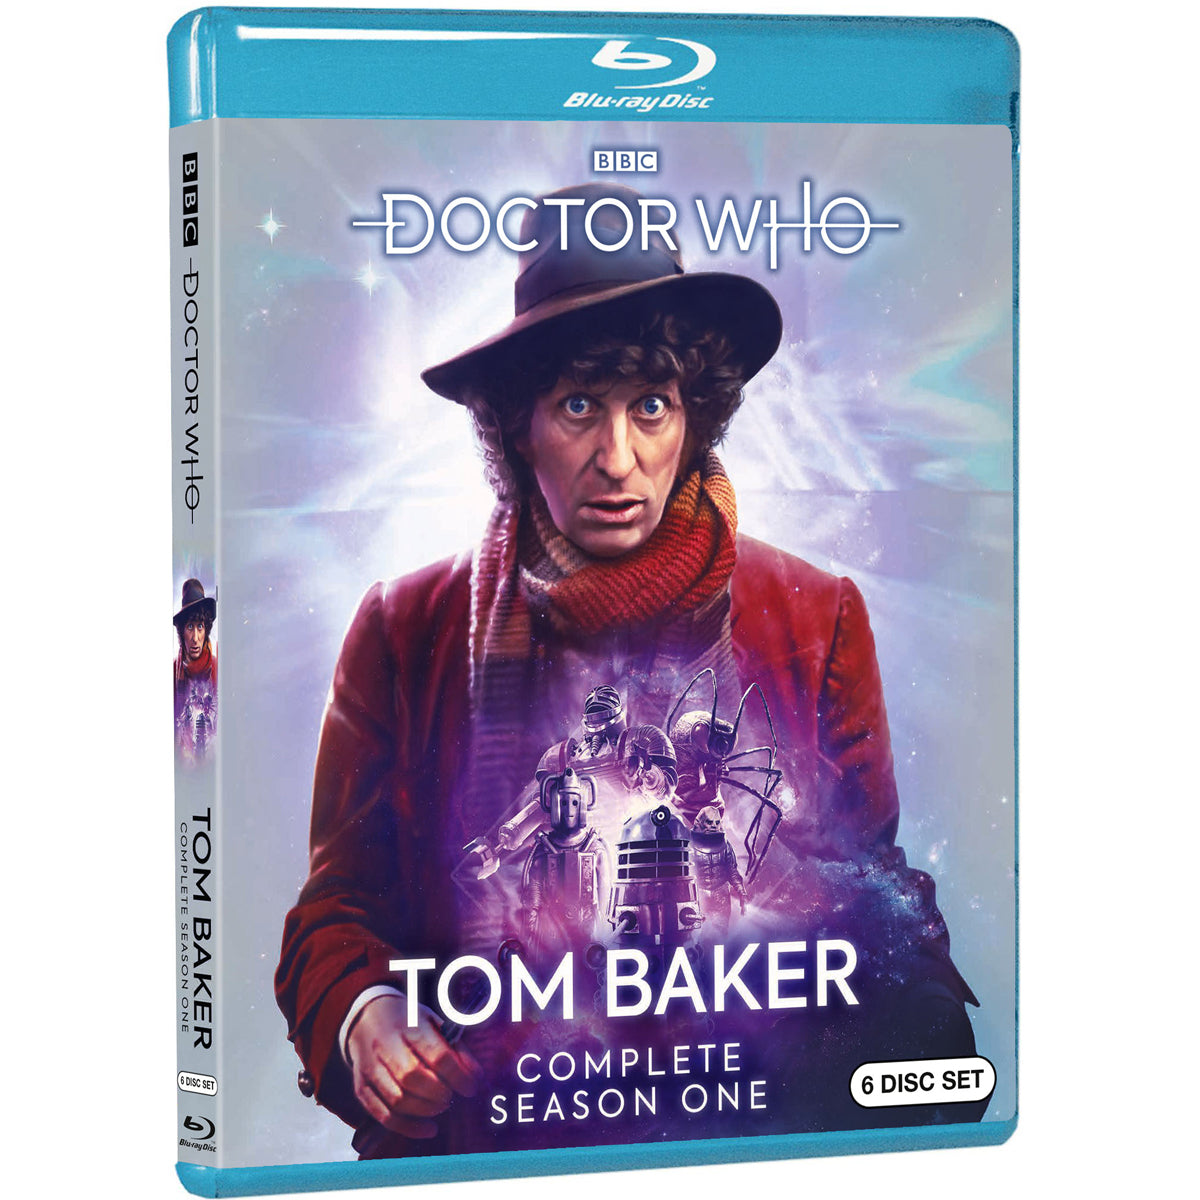 Doctor Who: William Hartnell Complete Season 2 (Blu-ray) – BBC Shop US